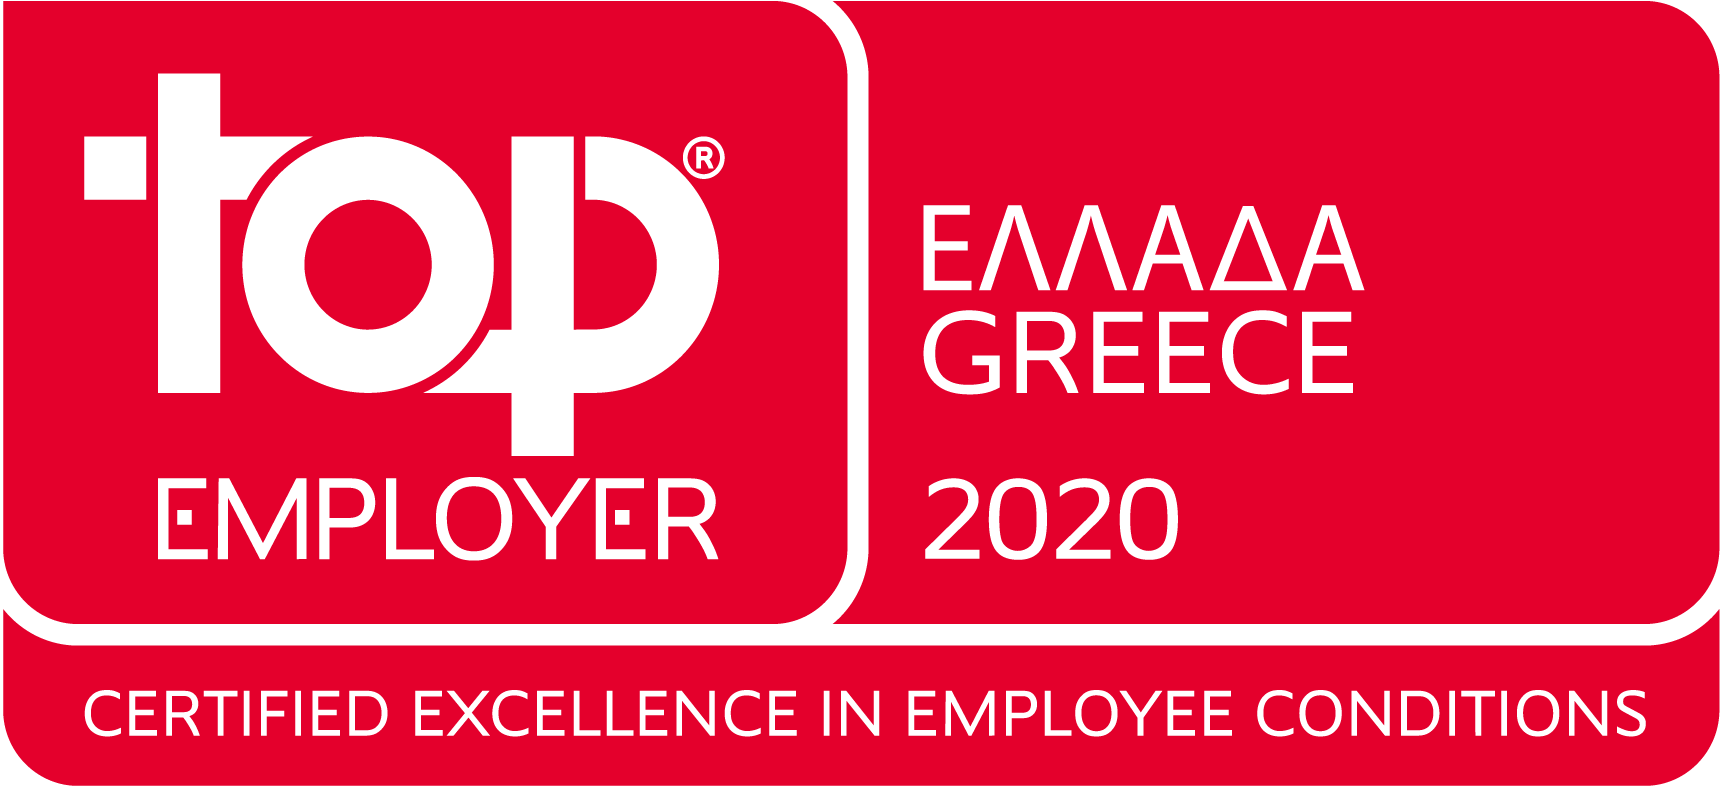 https://www.neolaia.gr/wp-content/uploads/2020/01/Top_Employer_Greece_2020.png